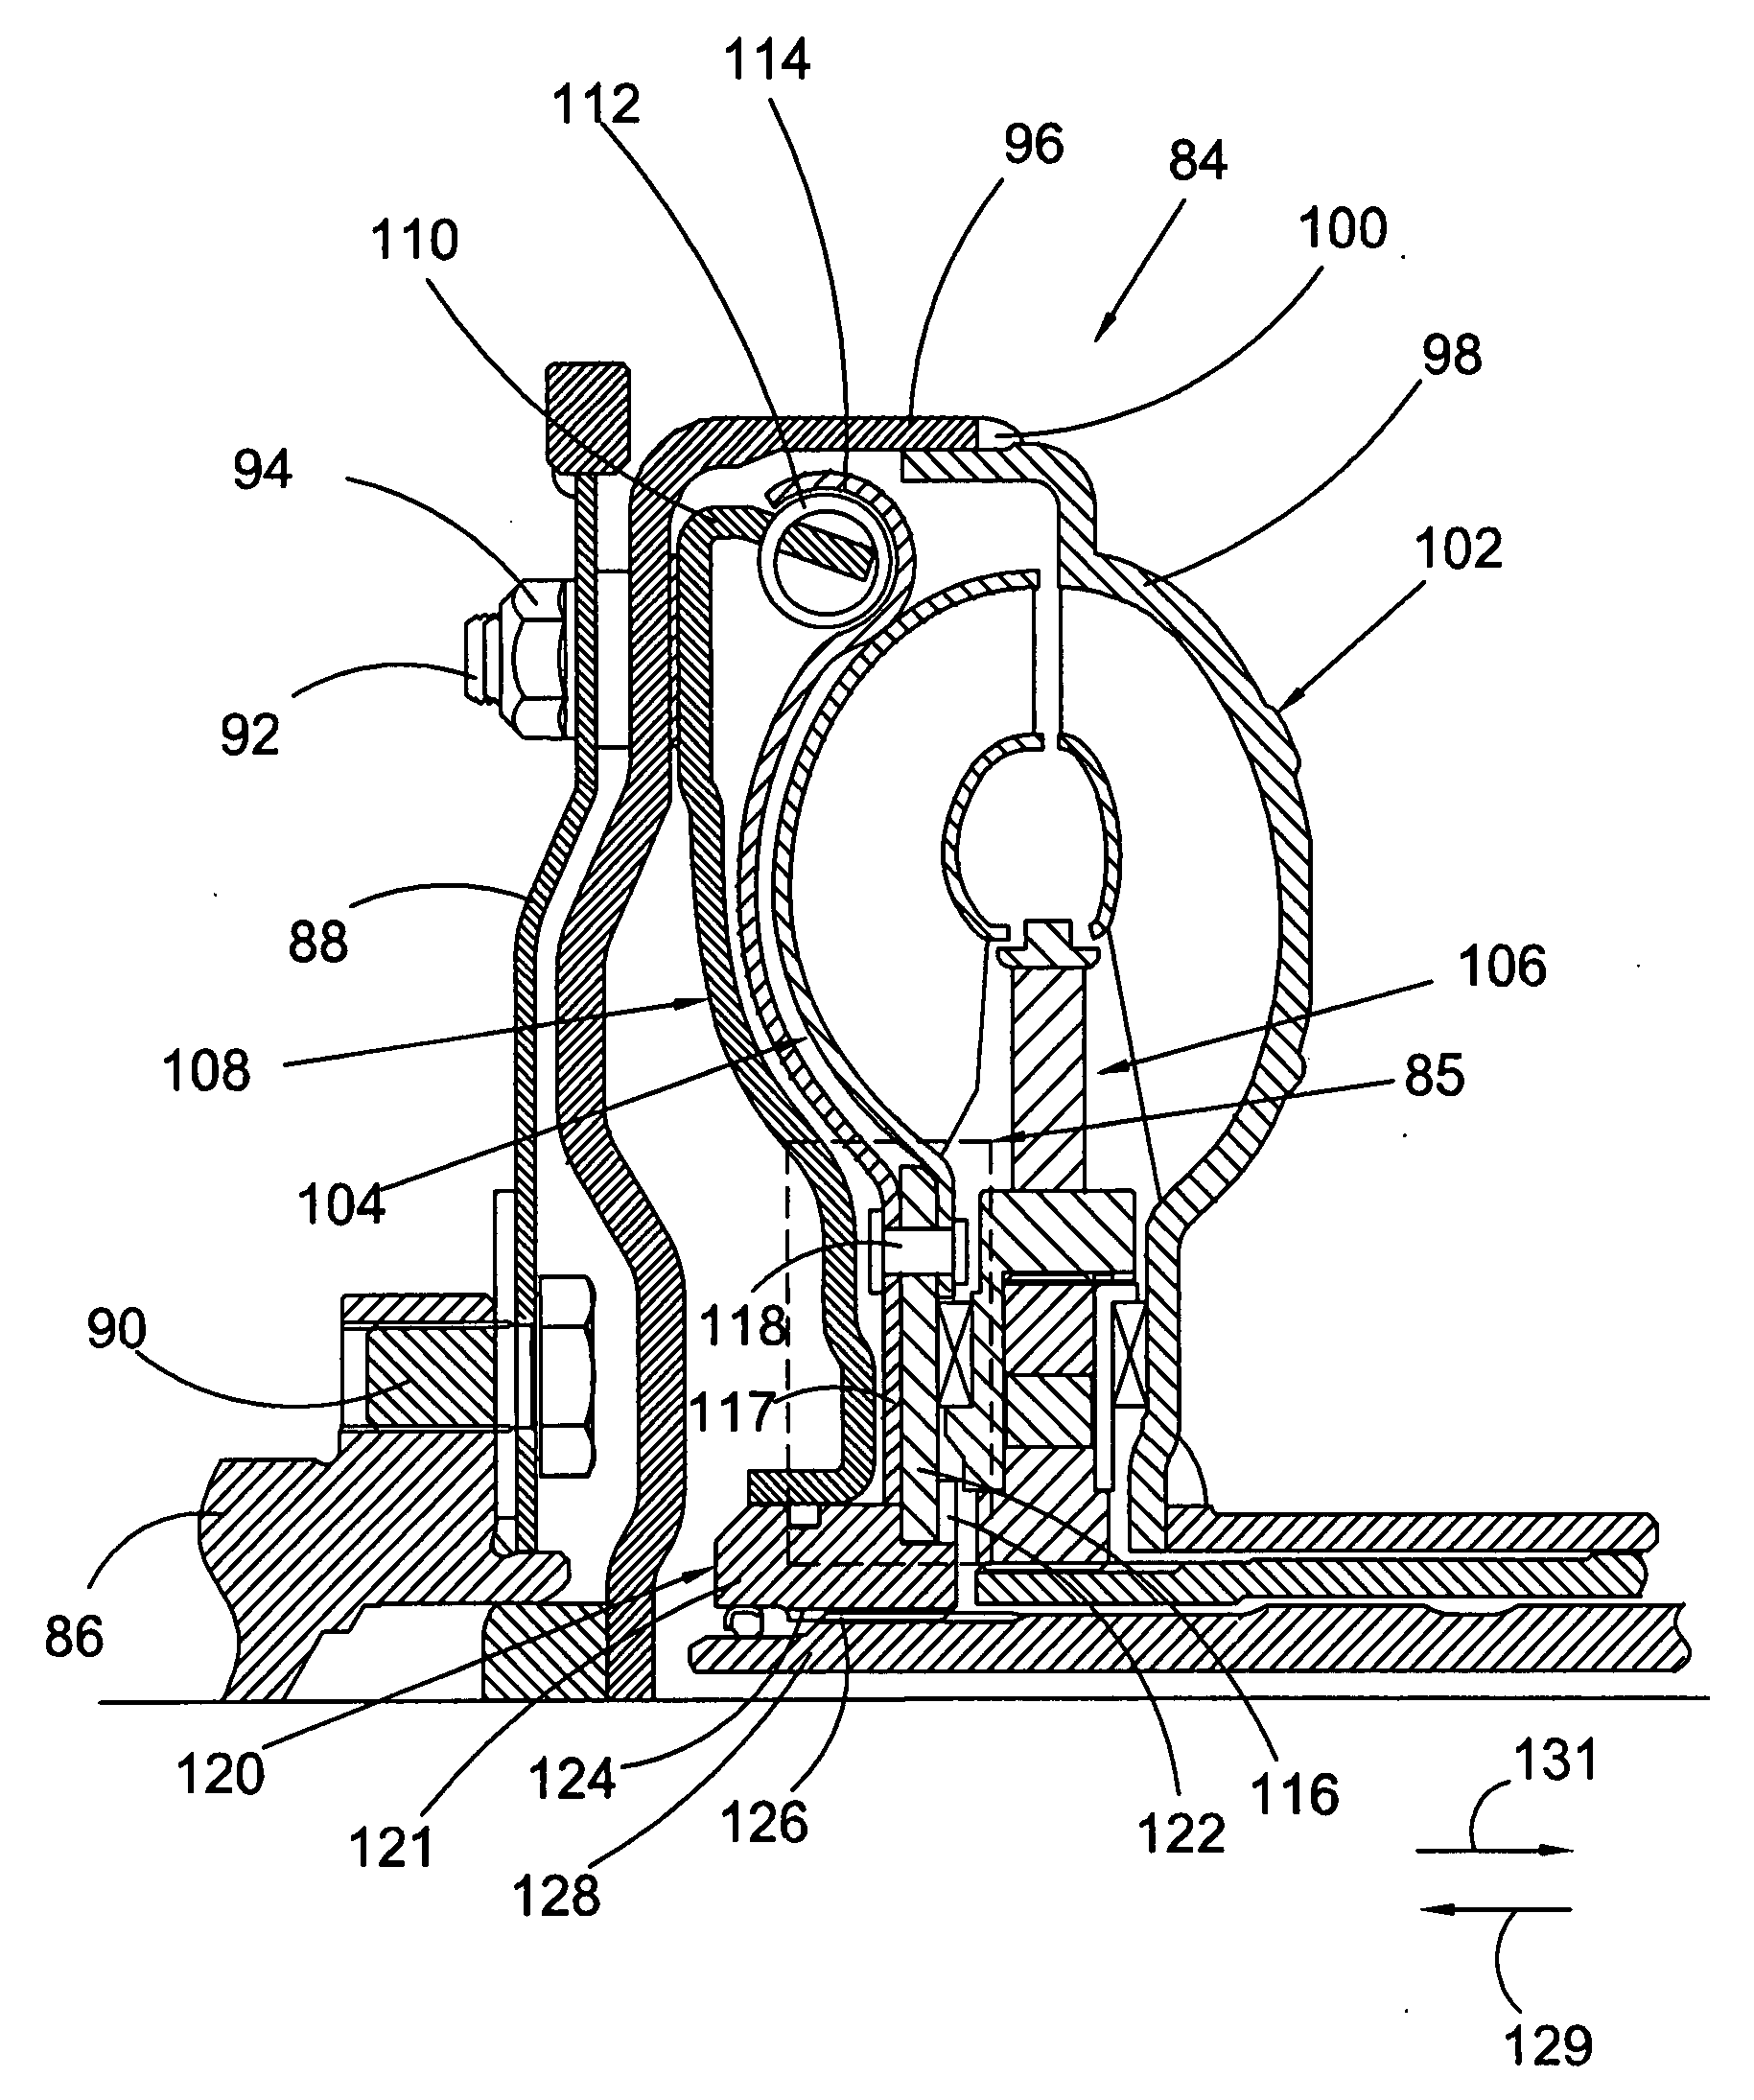 Apparatus for joining components to a hub